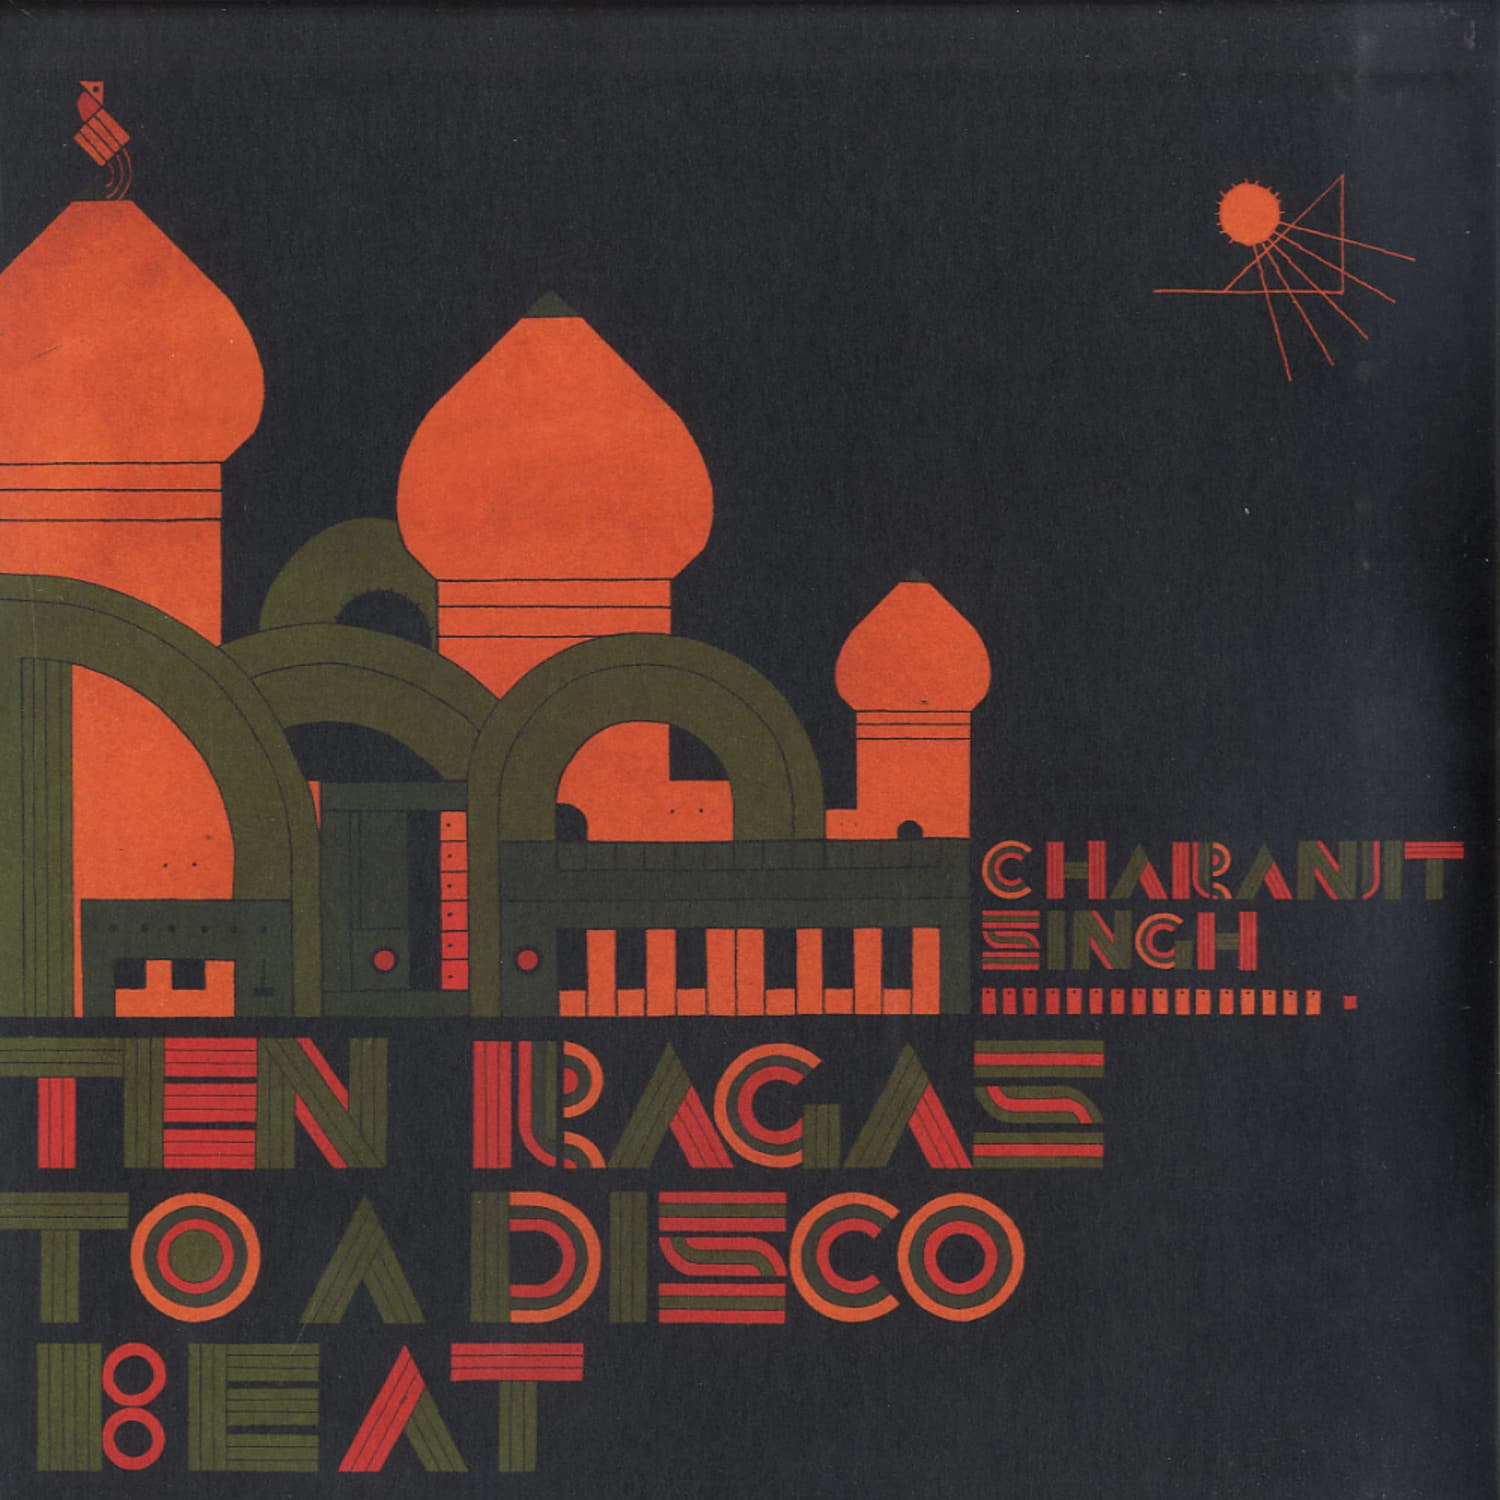 Charanjit Singh - SYNTHESIZING - 10 RAGAS TO A DISCO BEAT 